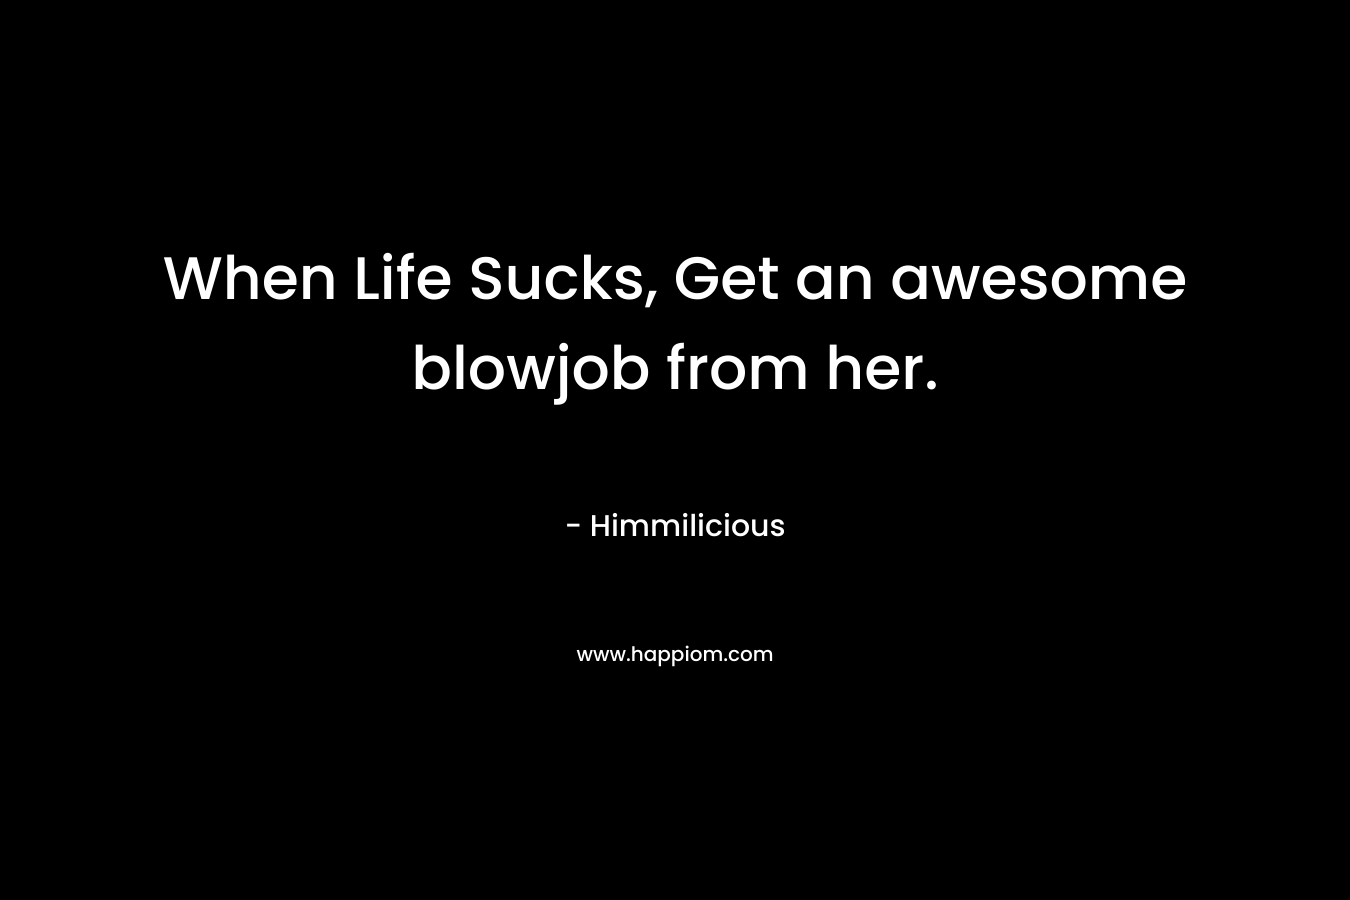 When Life Sucks, Get an awesome blowjob from her. – Himmilicious